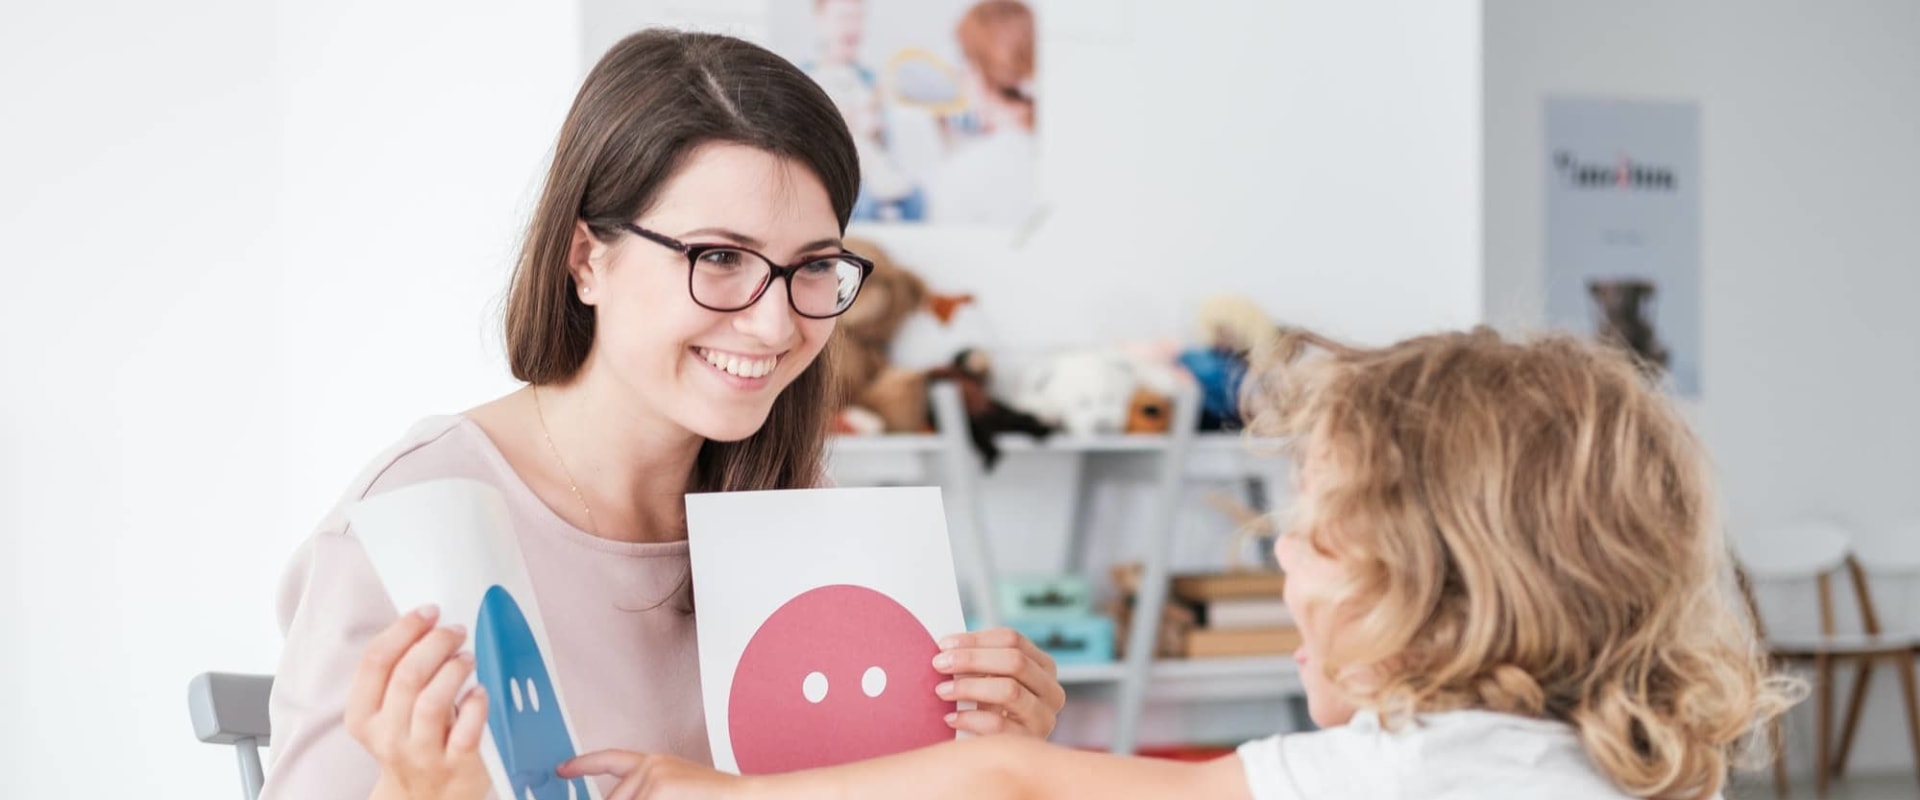 5 Conditions That Can Be Improved With Speech Therapy: An Expert's Guide